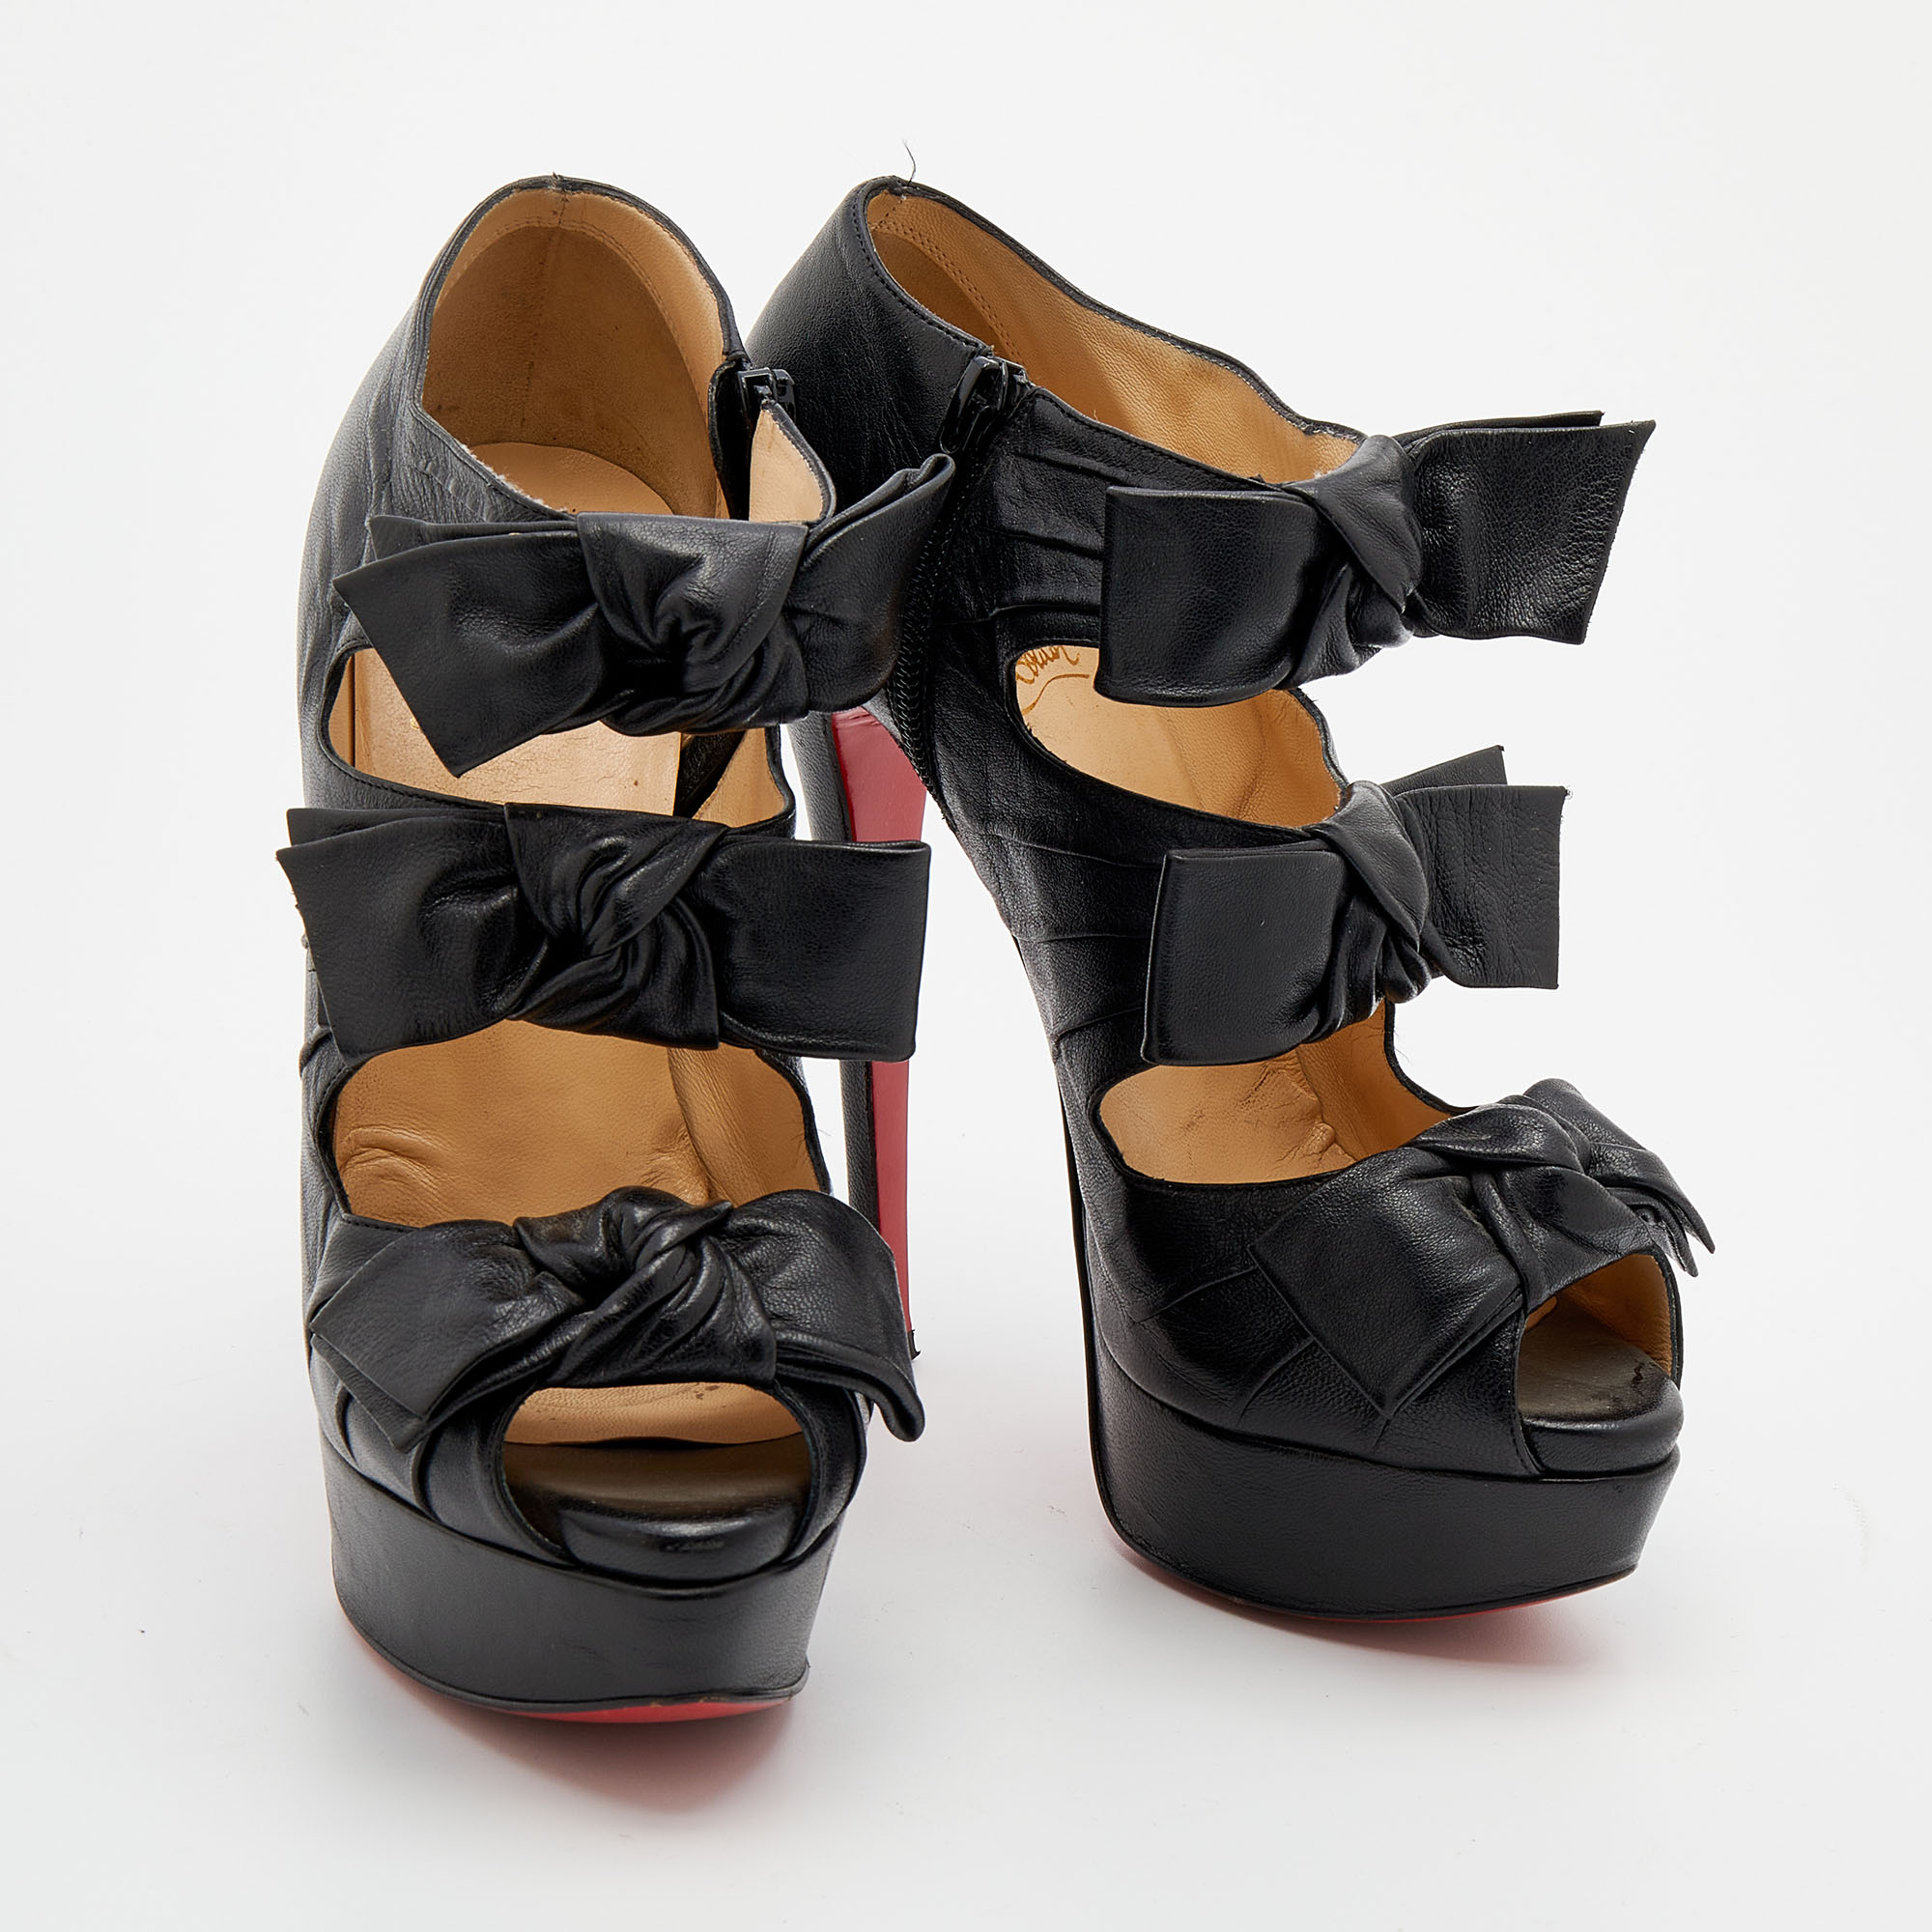 Christian Louboutin Black Leather Madame Butterfly Platform Booties Size 37